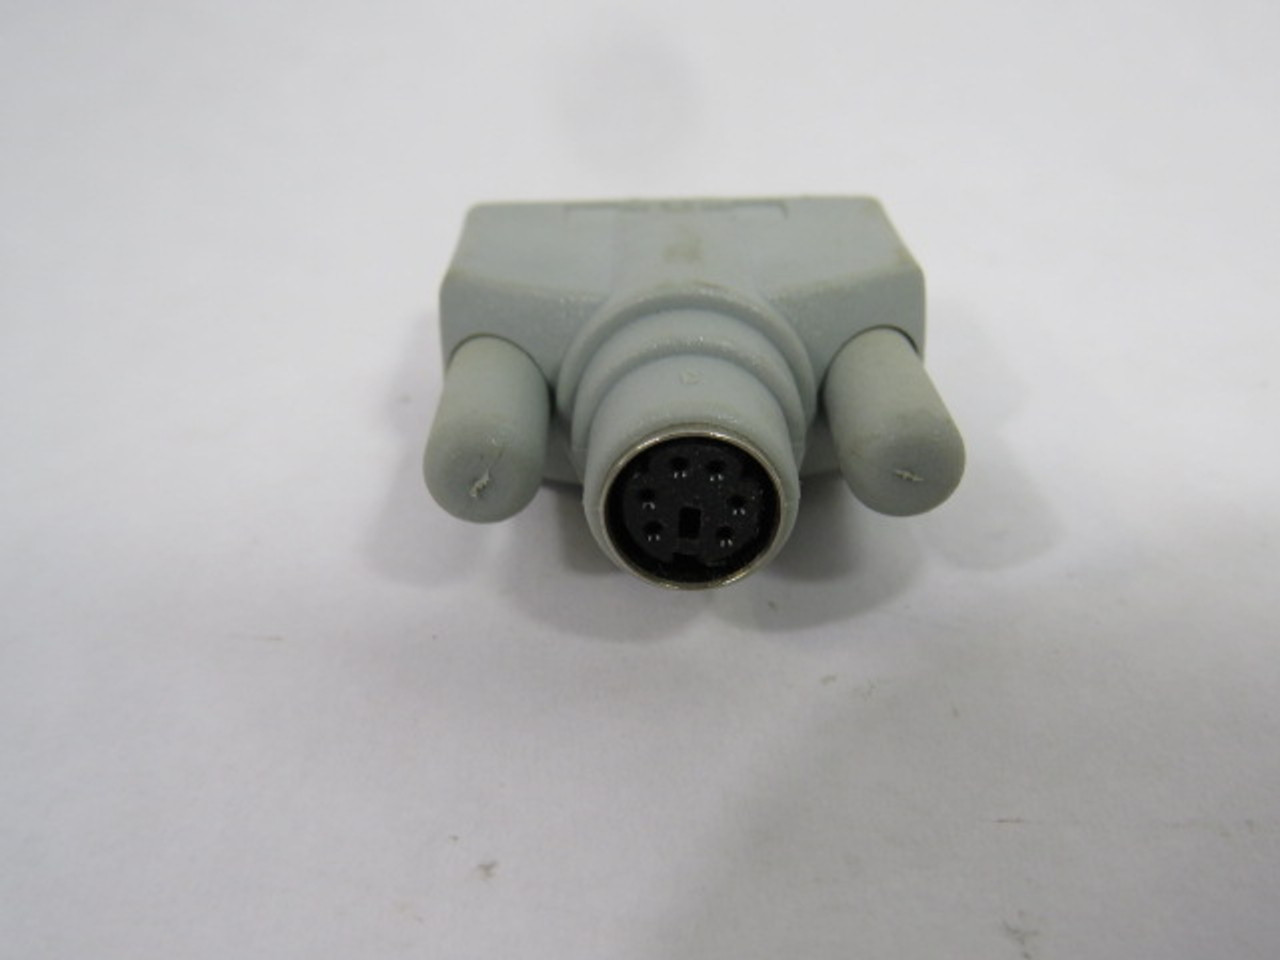 Microsoft 68666 Female Serial Adapter Connector 6 Pin to 9 Pin USED